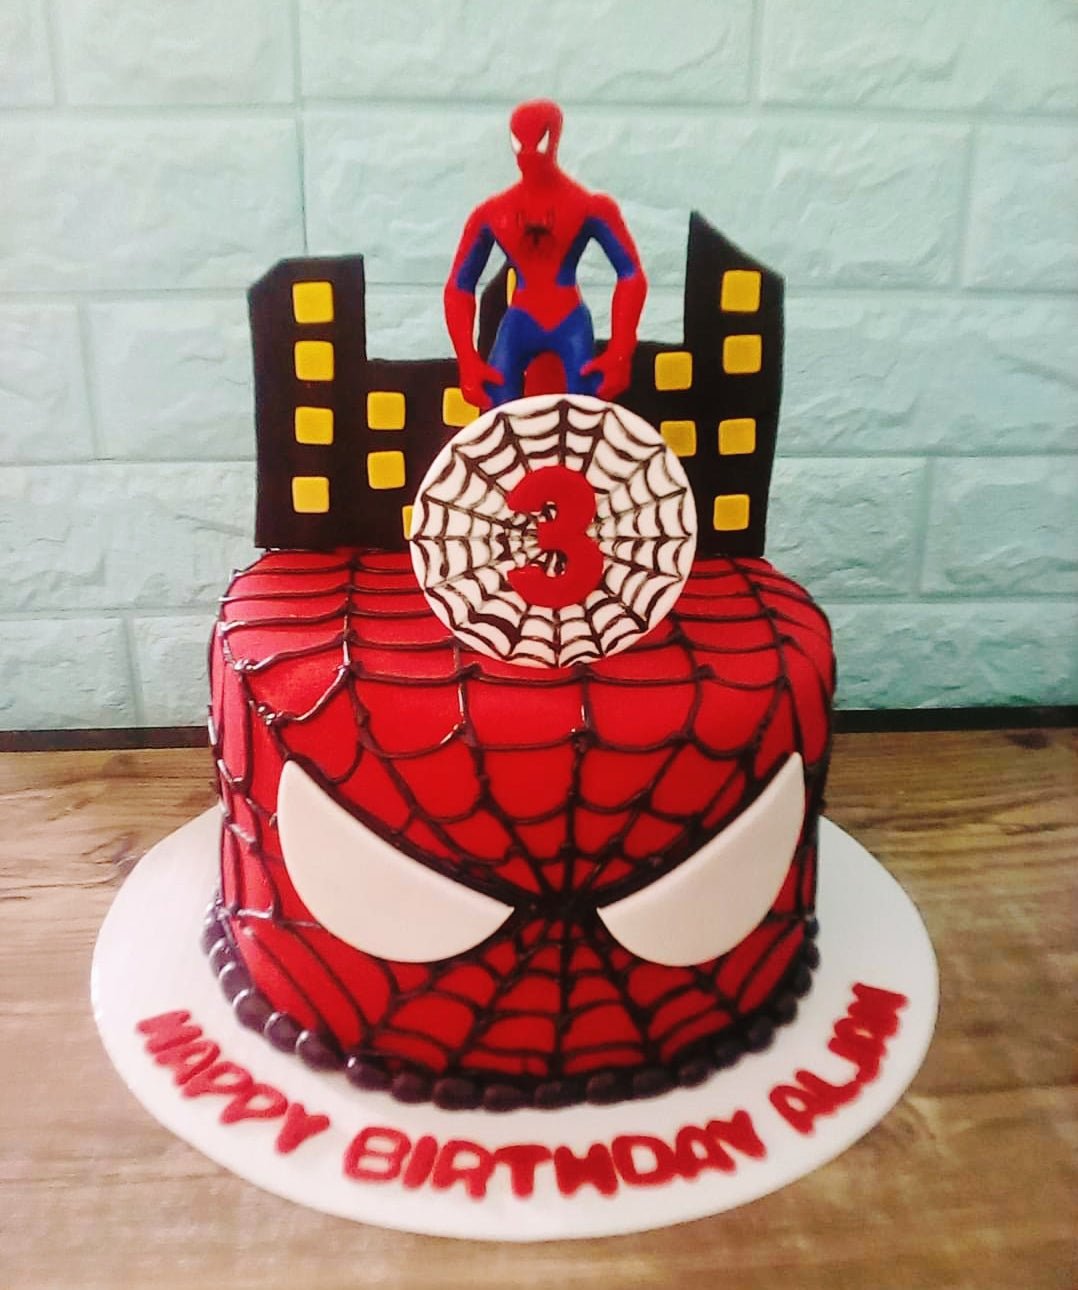 3pc Spiderman Cake Toppers Birthday Party Decoration | eBay